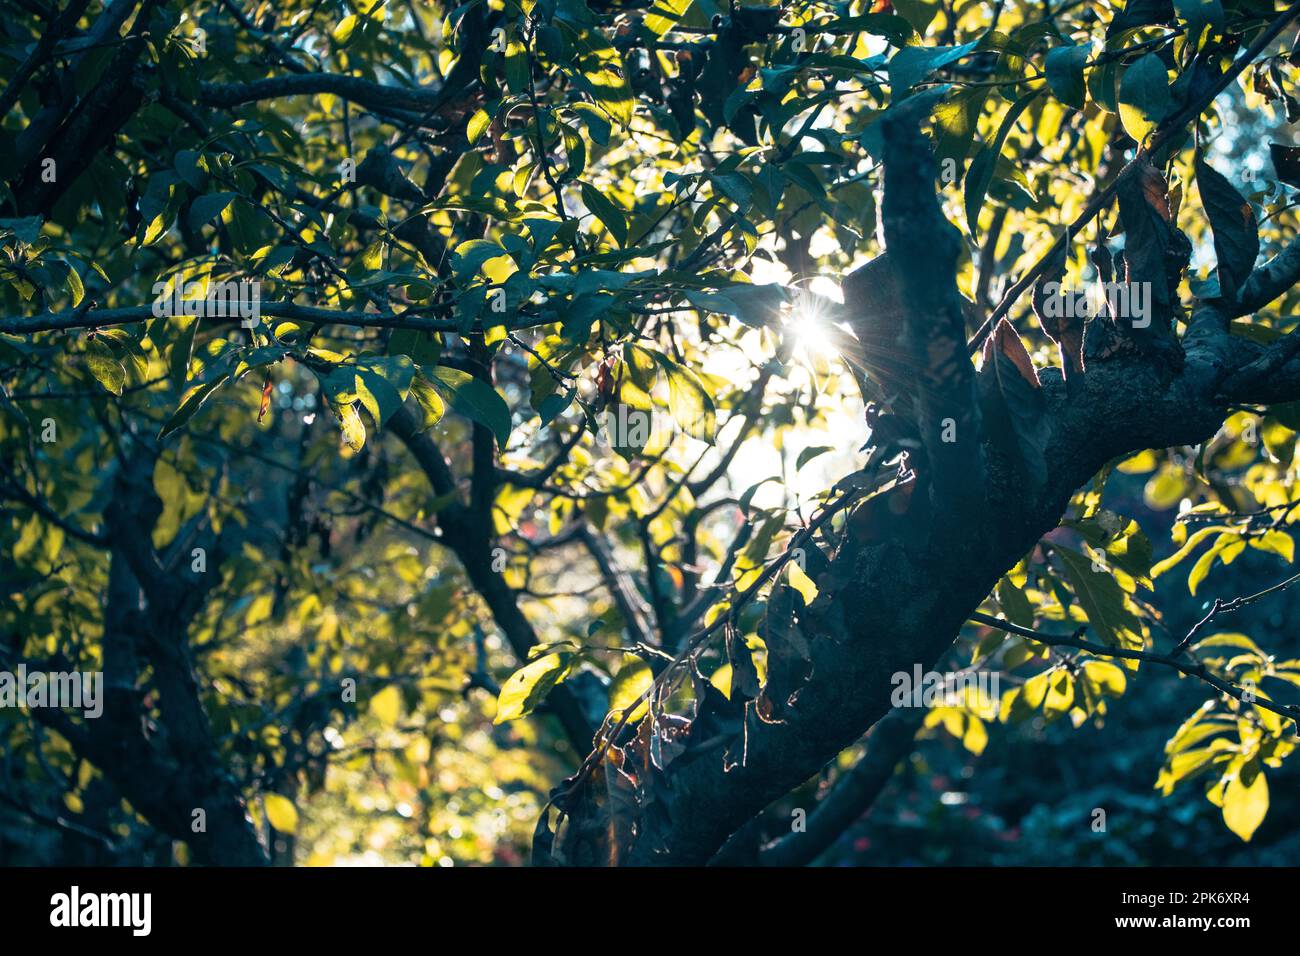 Green leaves of tree branches growing in park against bright sun shining through foliage on summer day Stock Photo